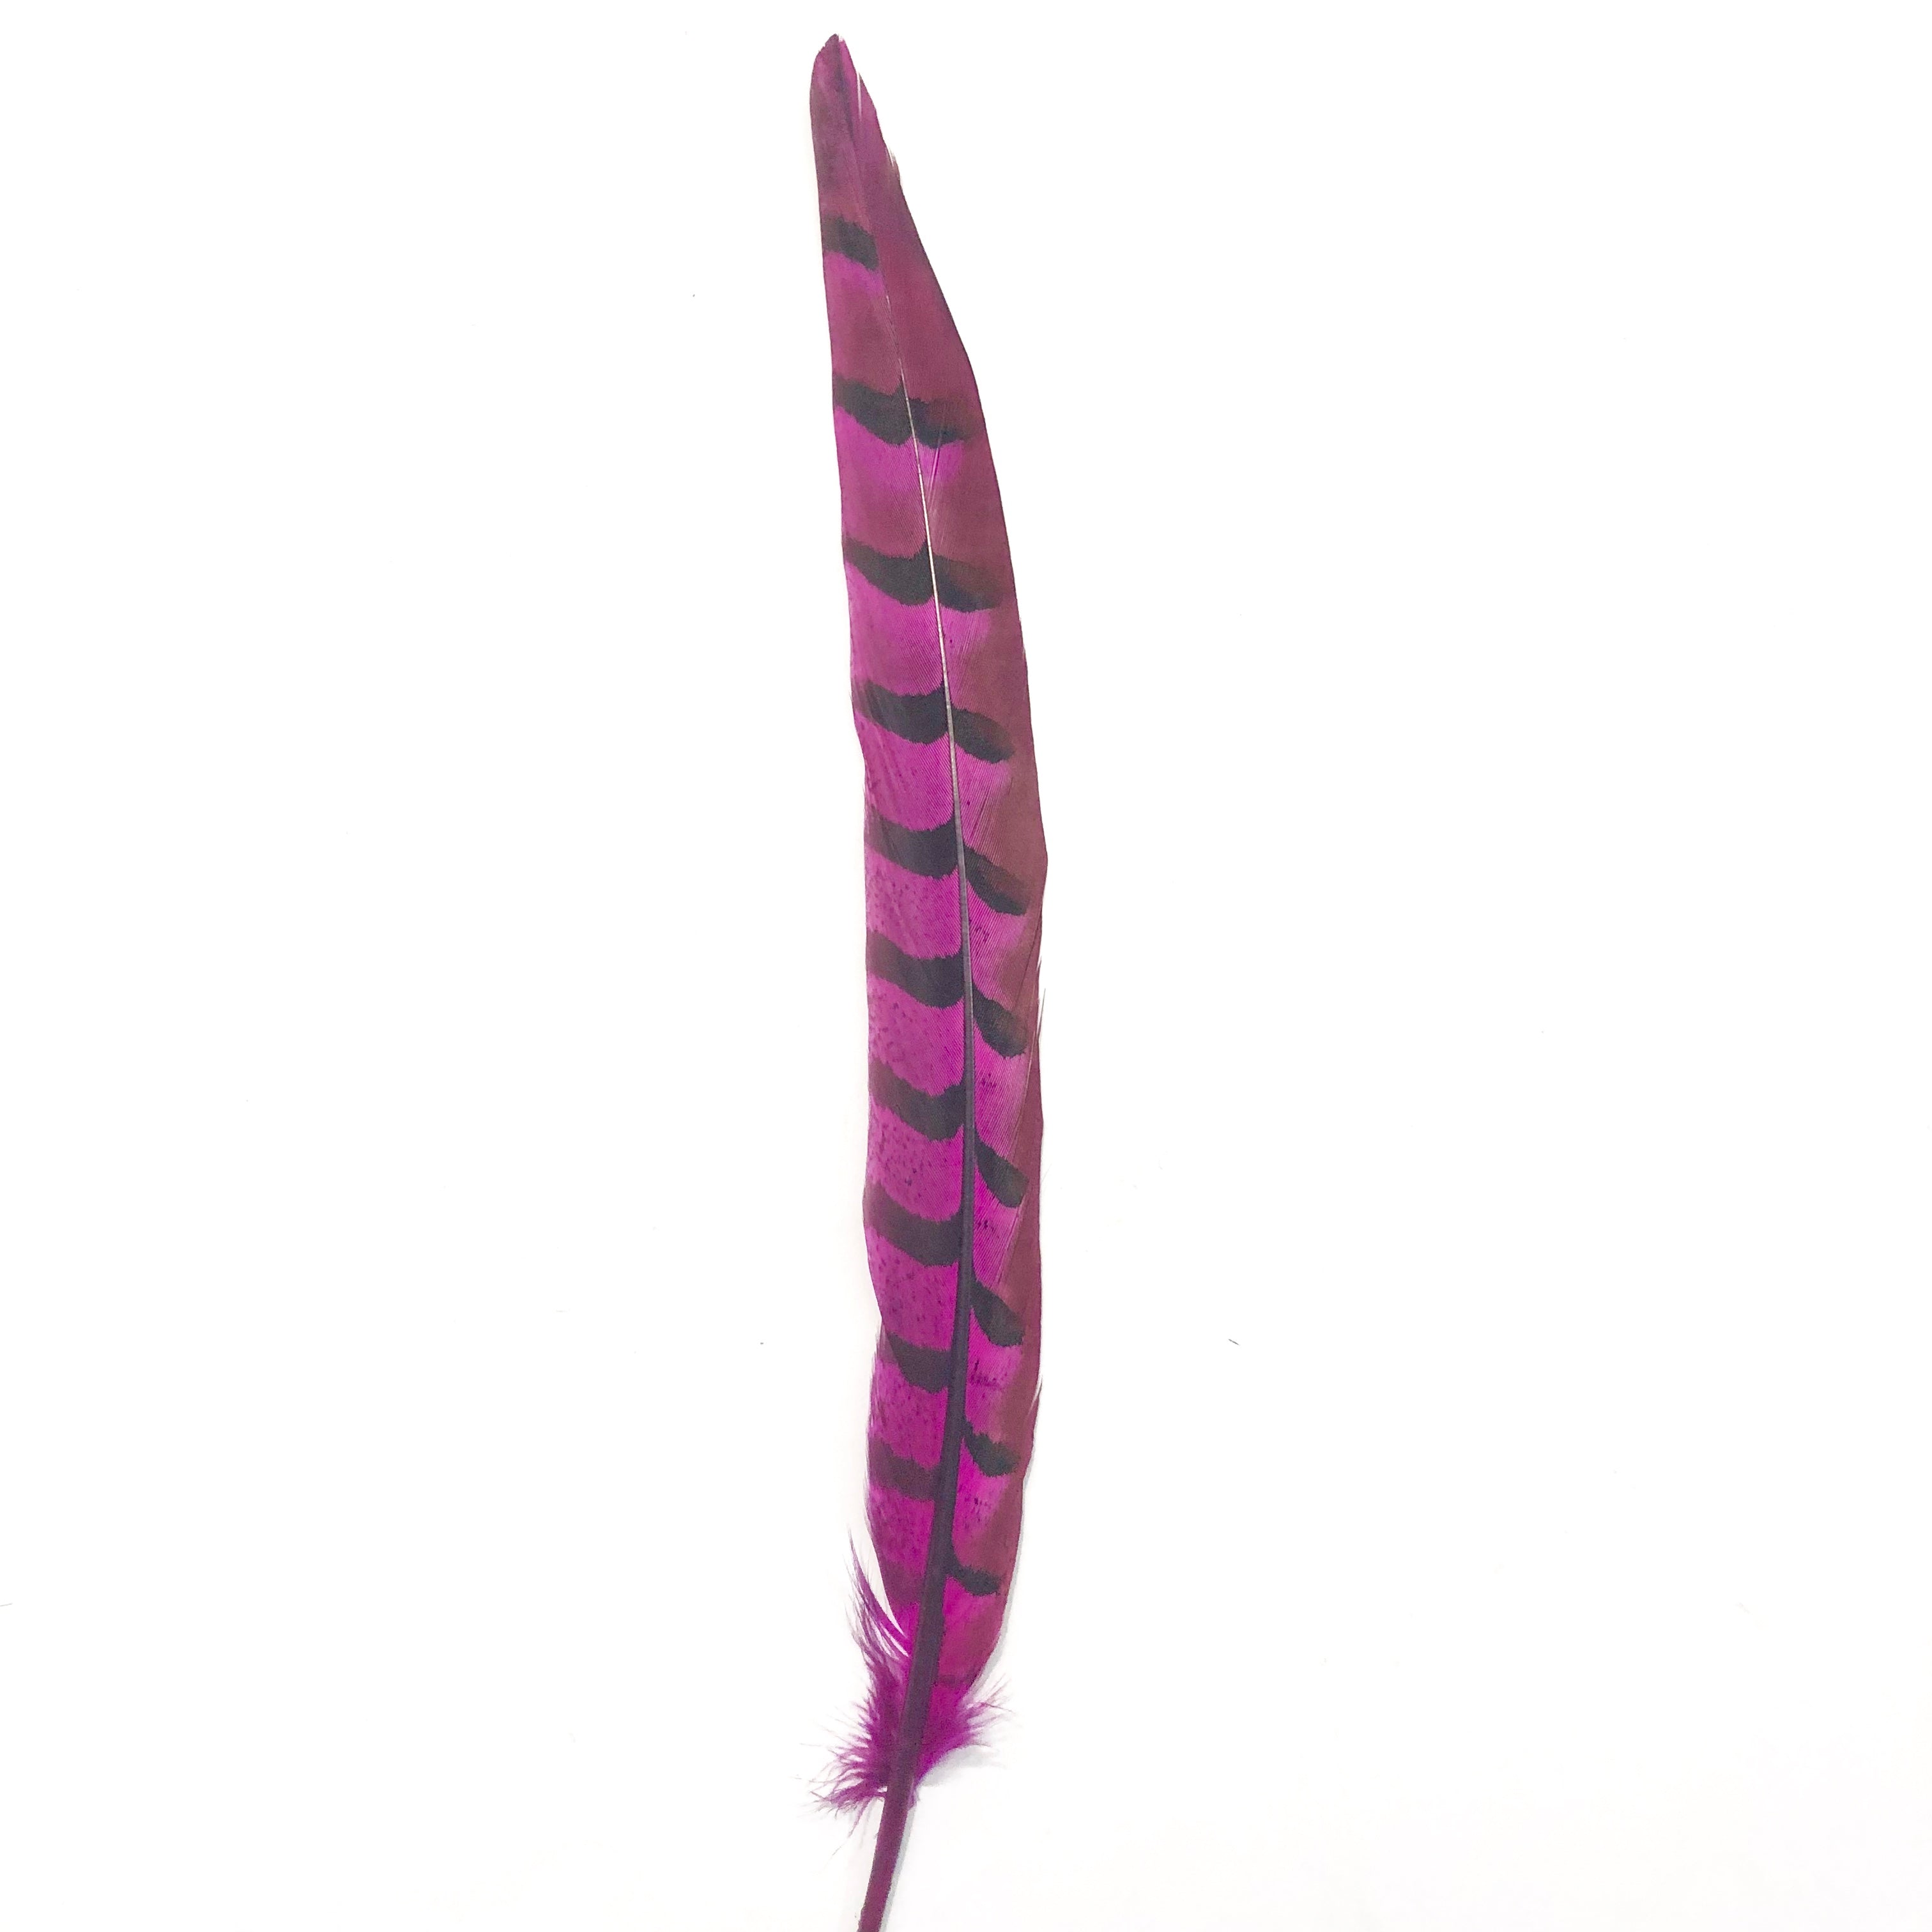 12" to 14" Reeves Pheasant Tail Feather - Cerise